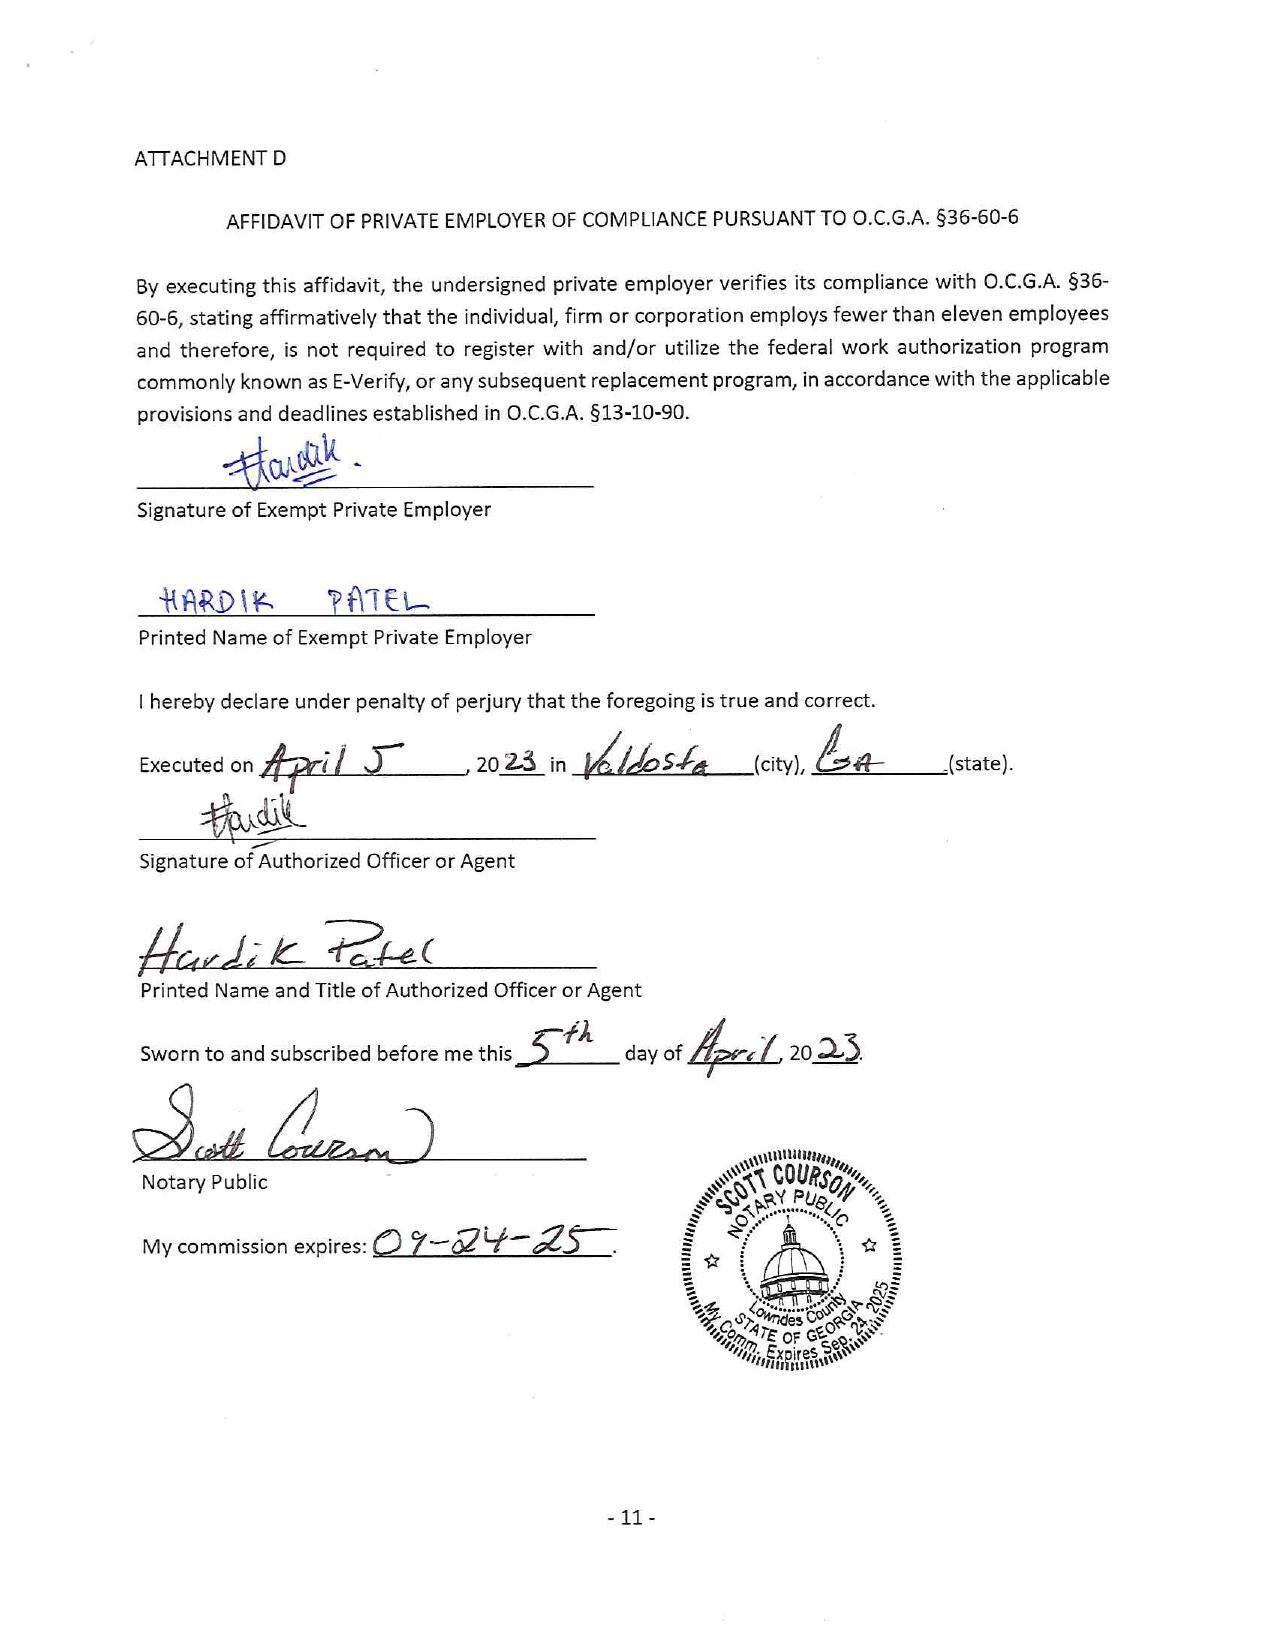 AFFIDAVIT OF PRIVATE EMPLOYER OF COMPLIANCE PURSUANT TO 0.C.G.A. §36-60-6